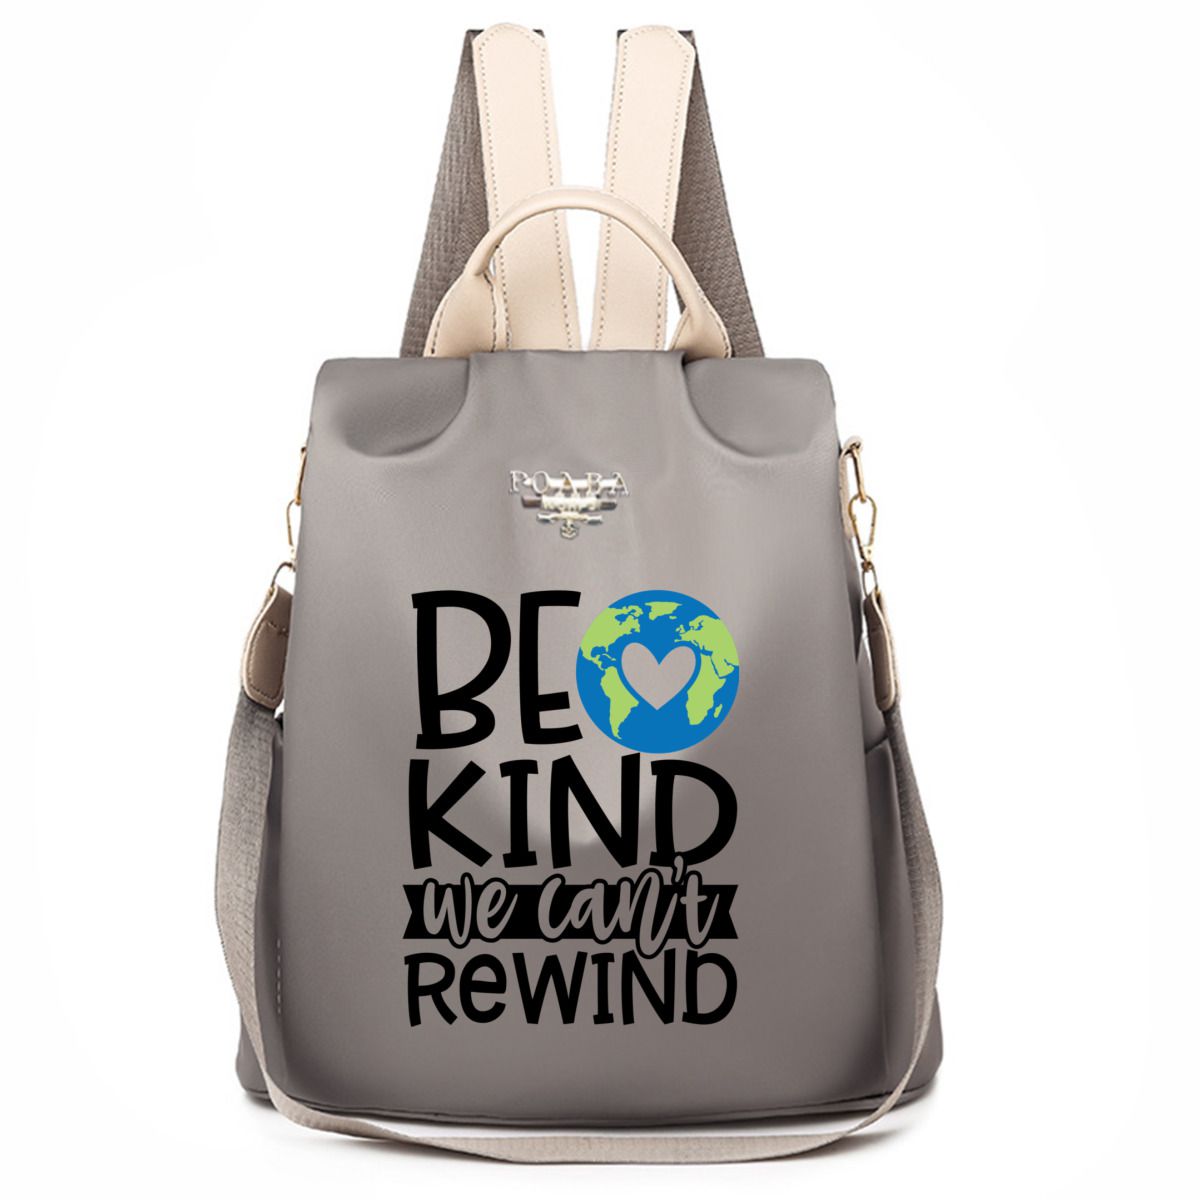 Be Kind We Cant Rewind バックパック No.46OSNH